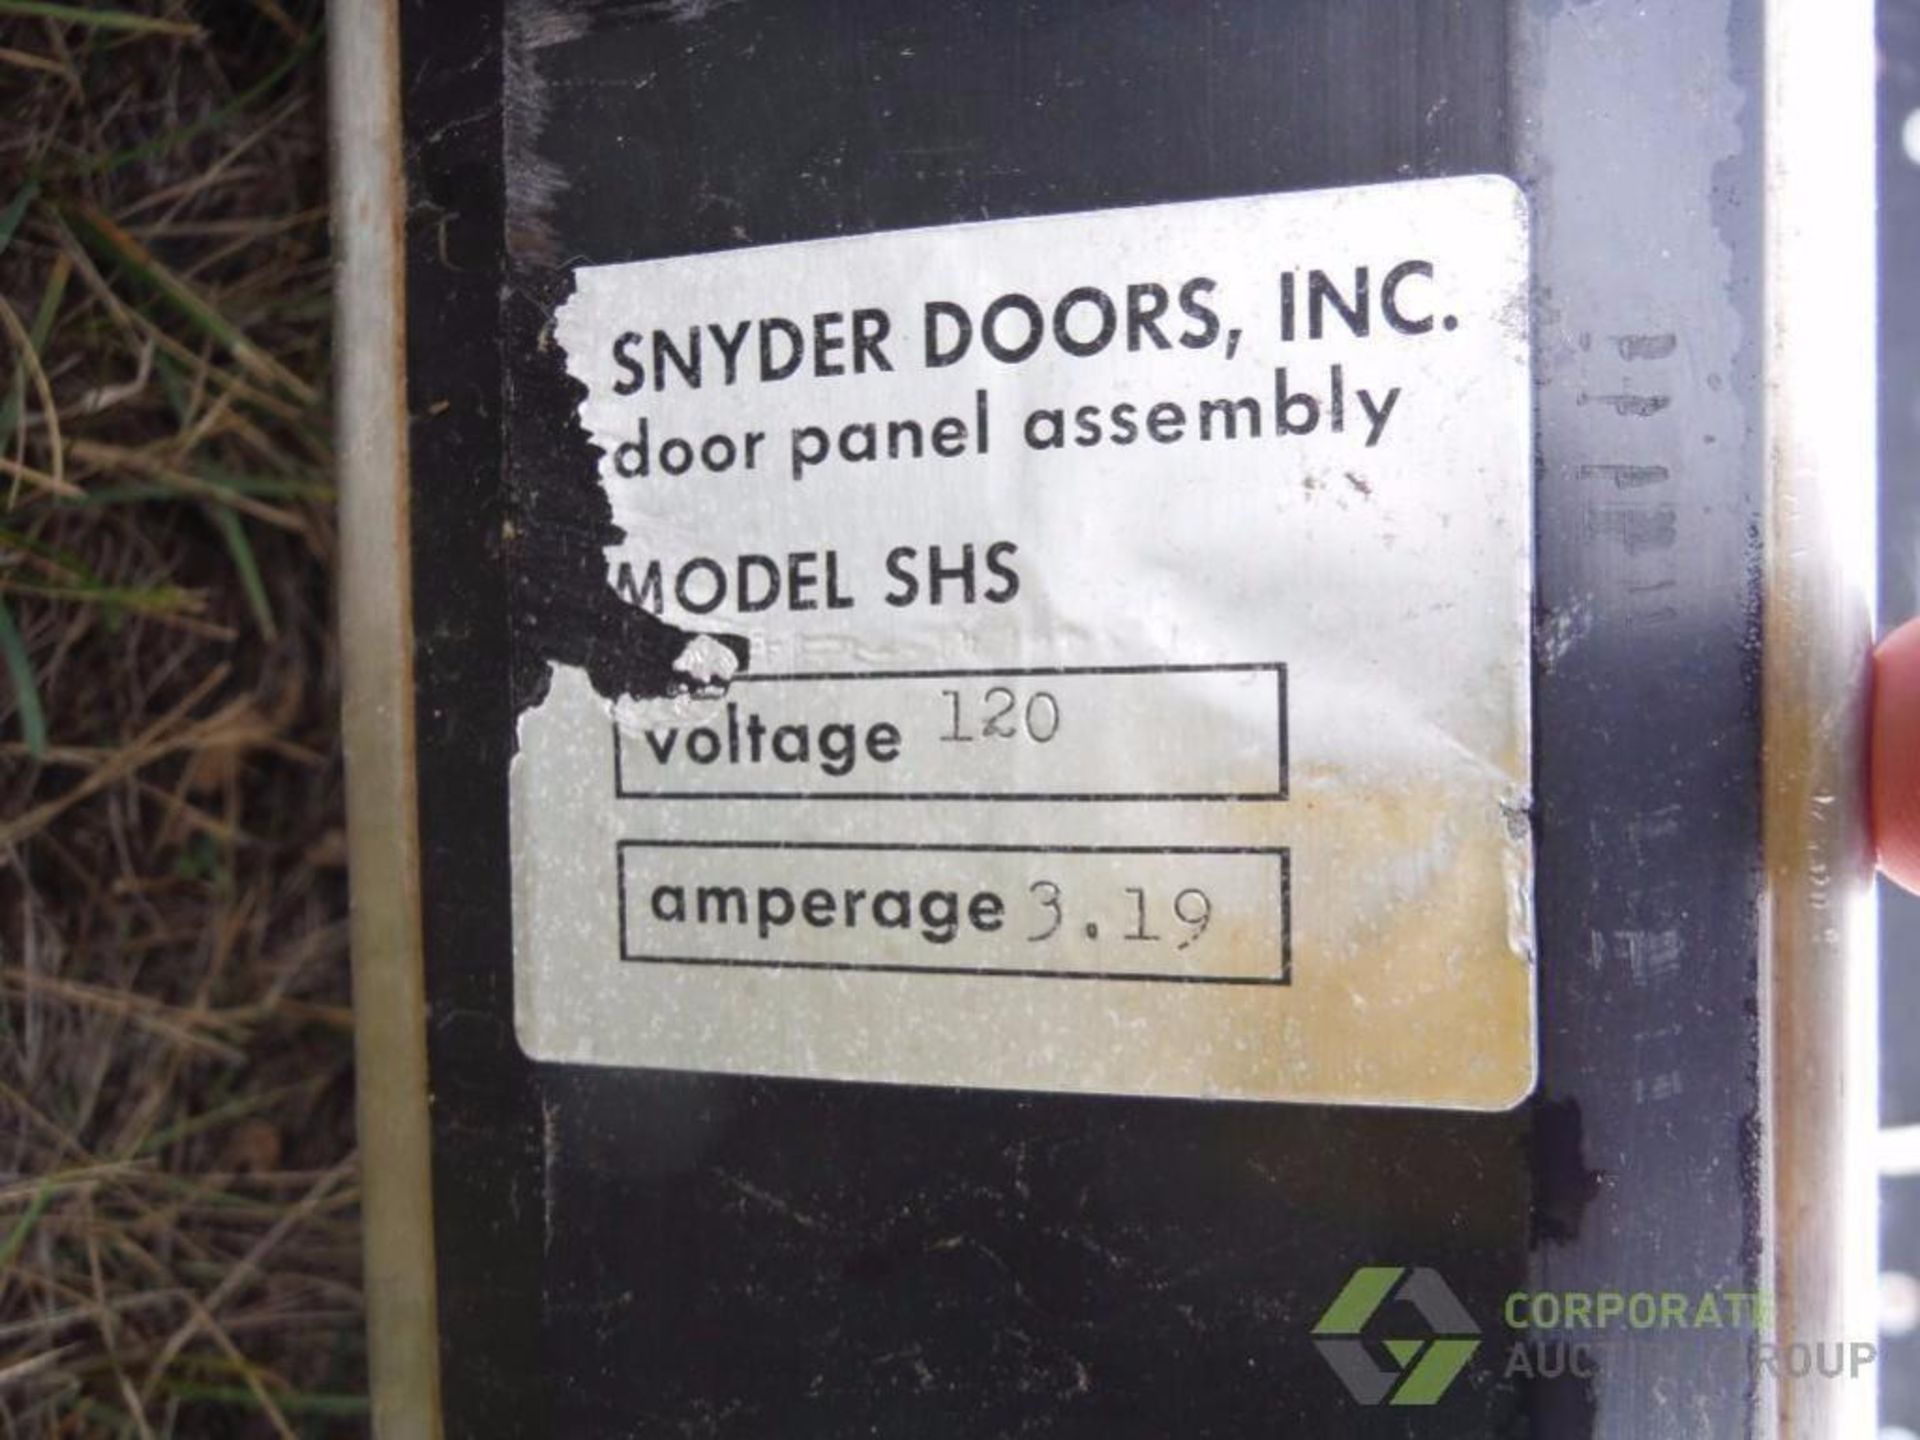 Snyder Doors Inc. SS electric sliding door, 66 in w x 98 in tall. Model: SHS, Volts/Amps: 120/3.19. - Image 6 of 7